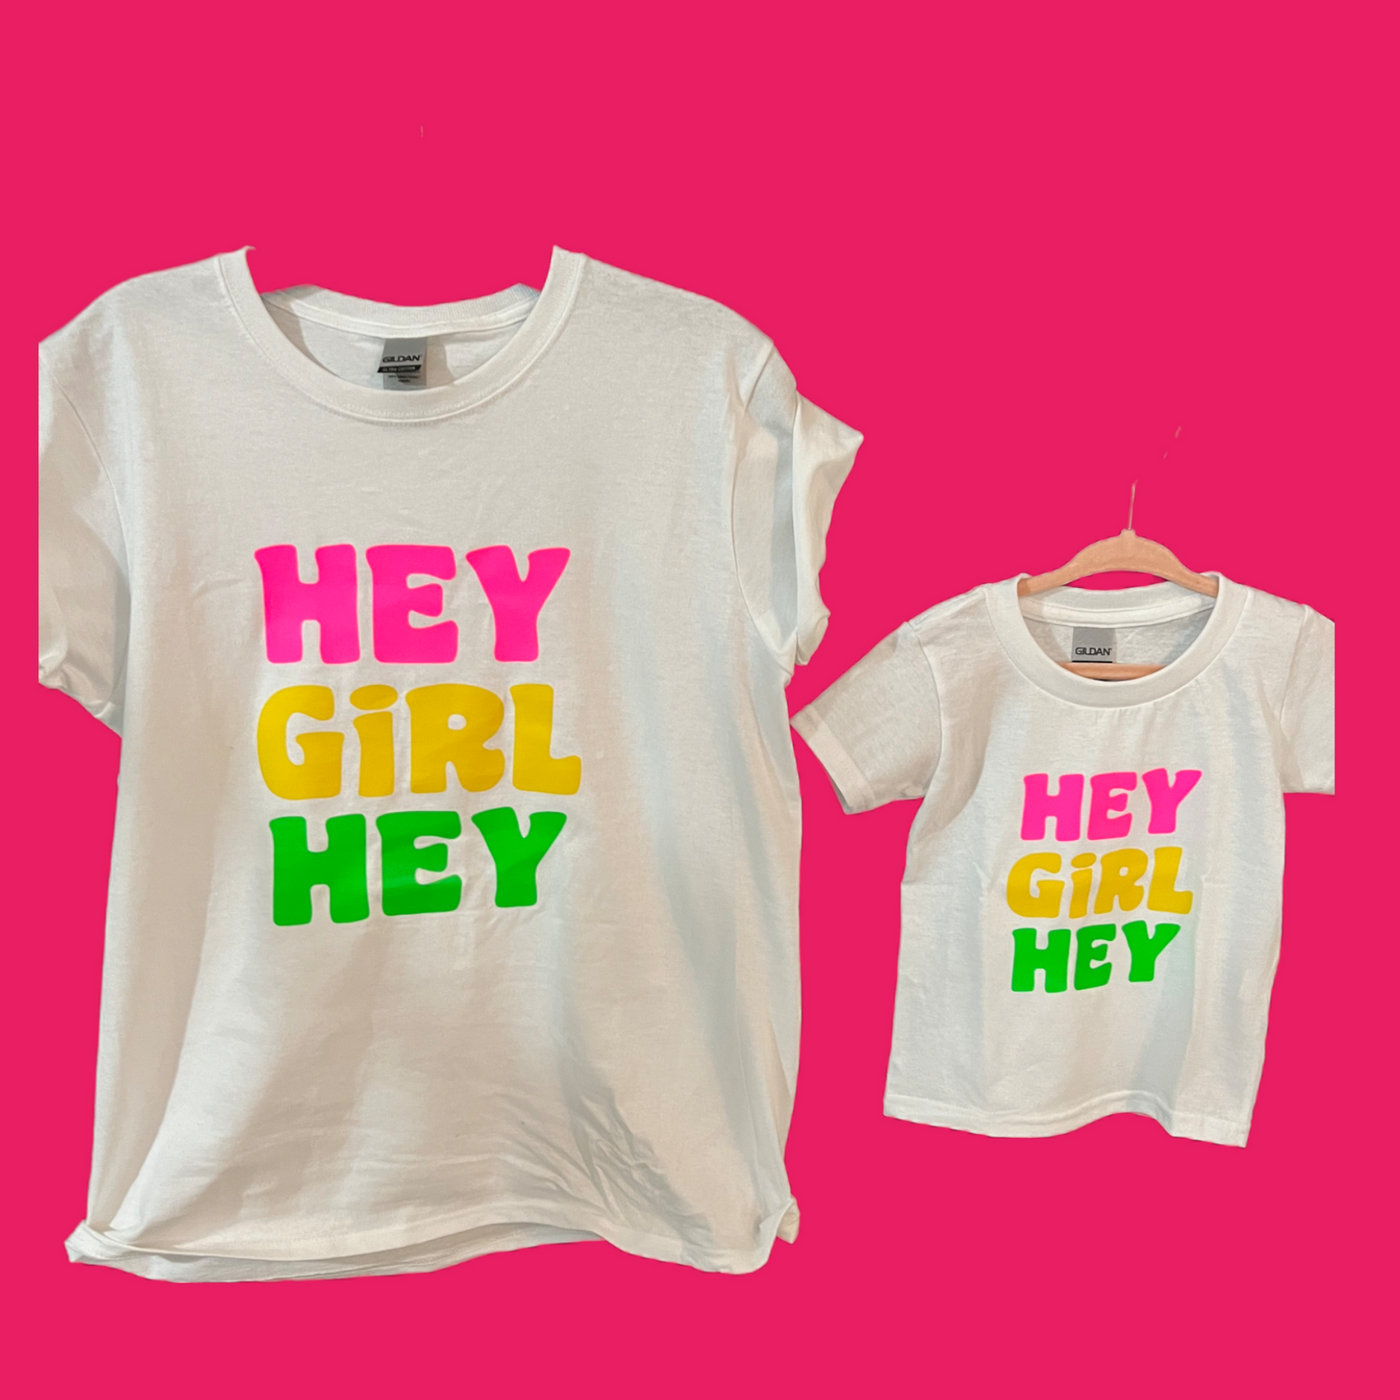 Jayla Bean- “HEY GIRL” Mommy and Me Shirts